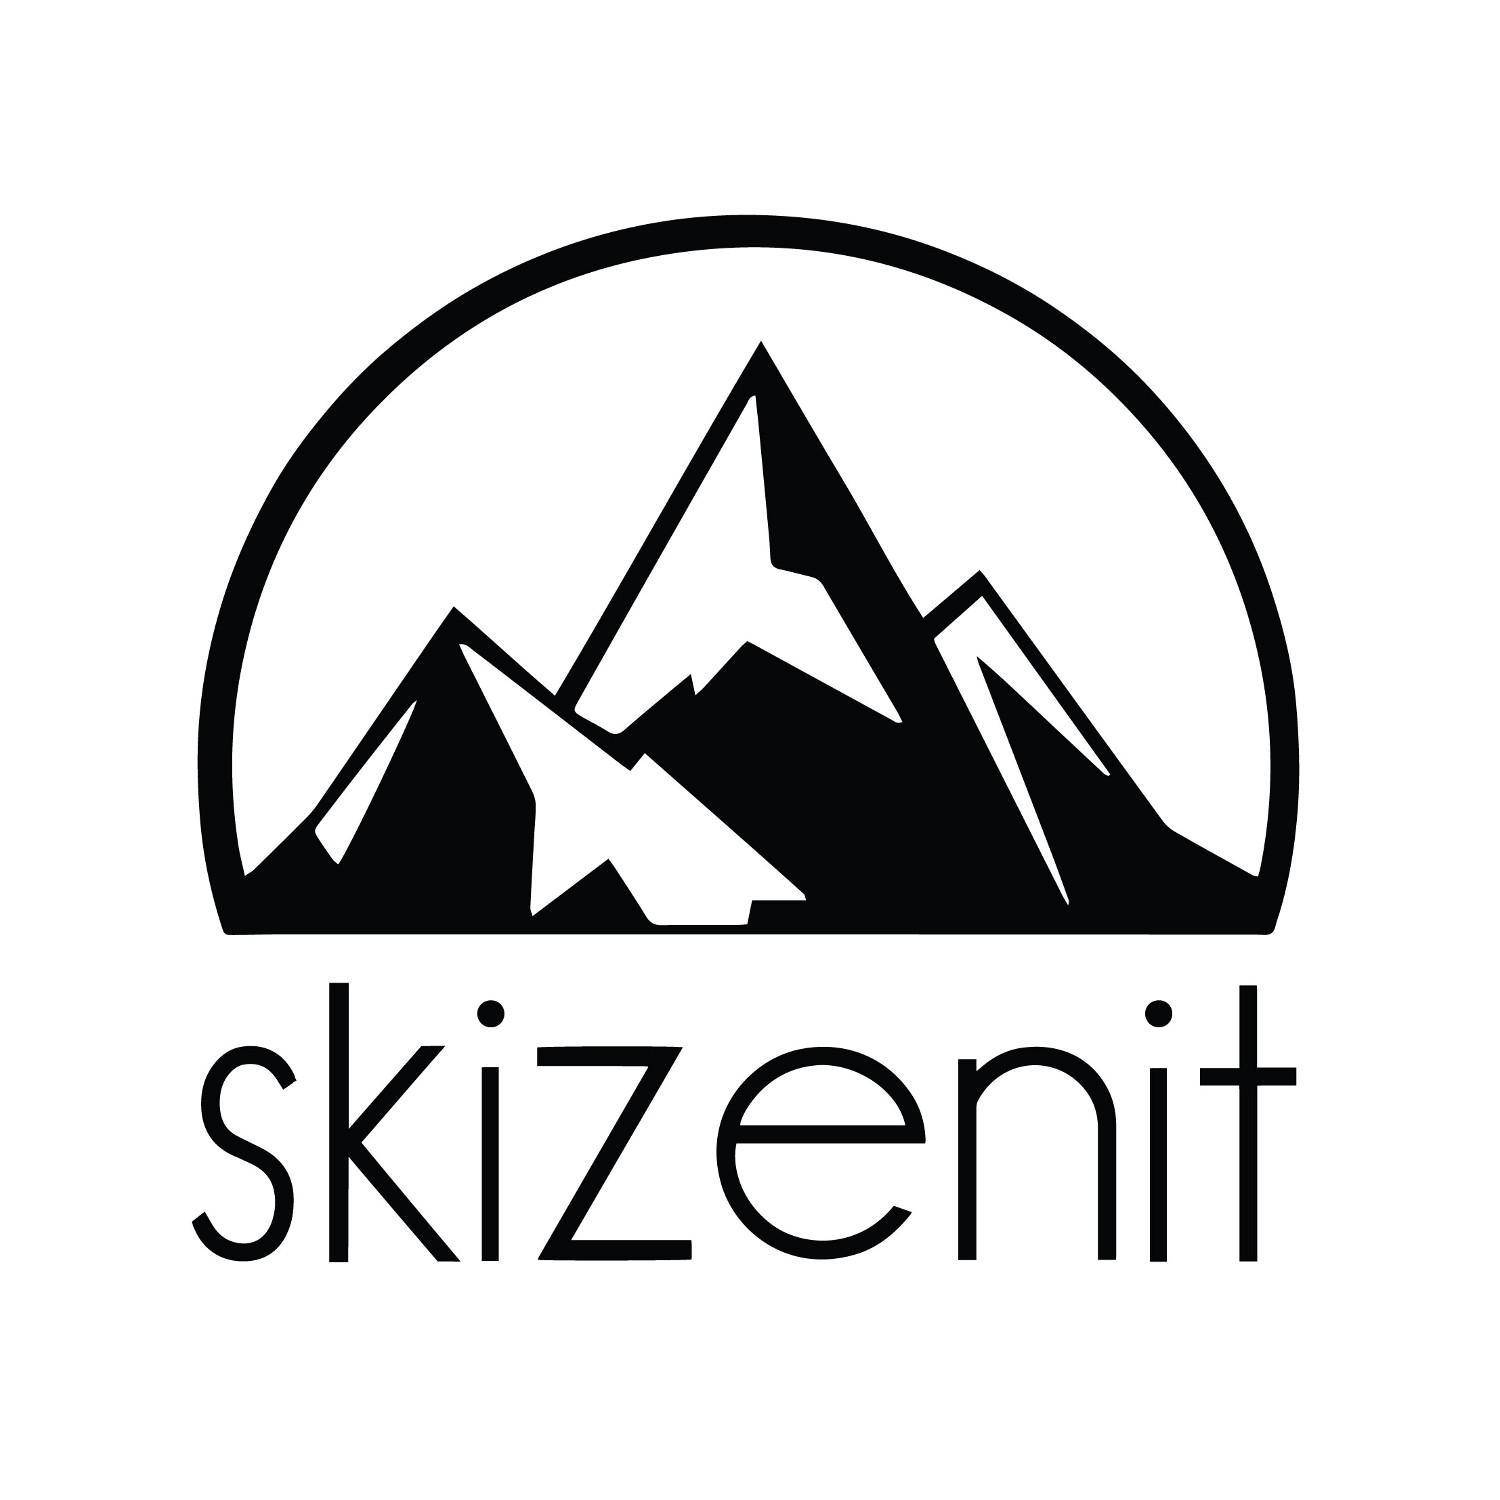 Adult Ski Lessons for All Levels from Ski school Ski Zenit Saas-Fee